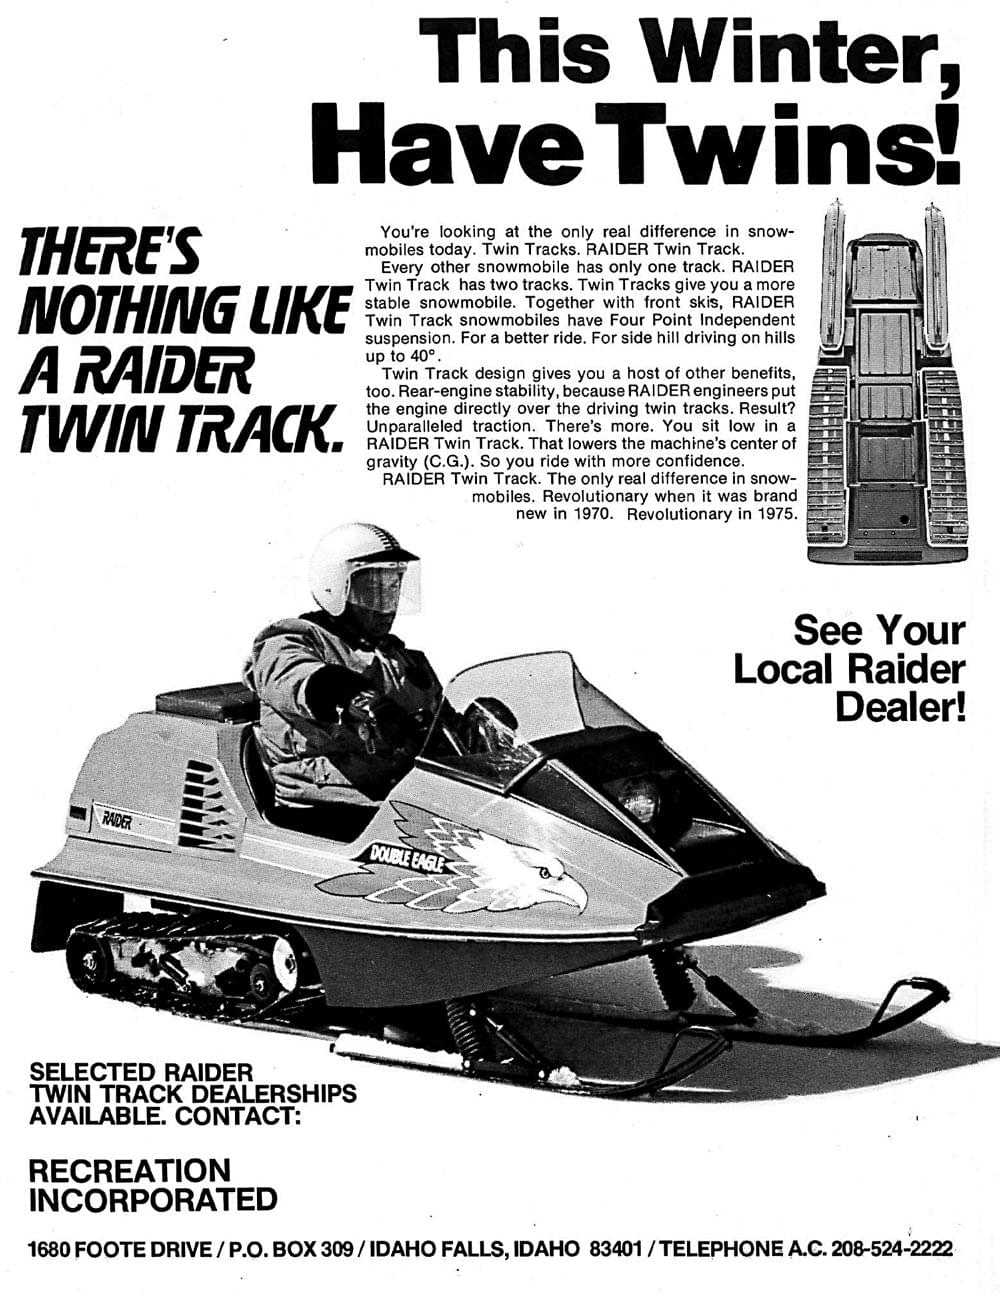 black and white Raider advertisement from the 70s